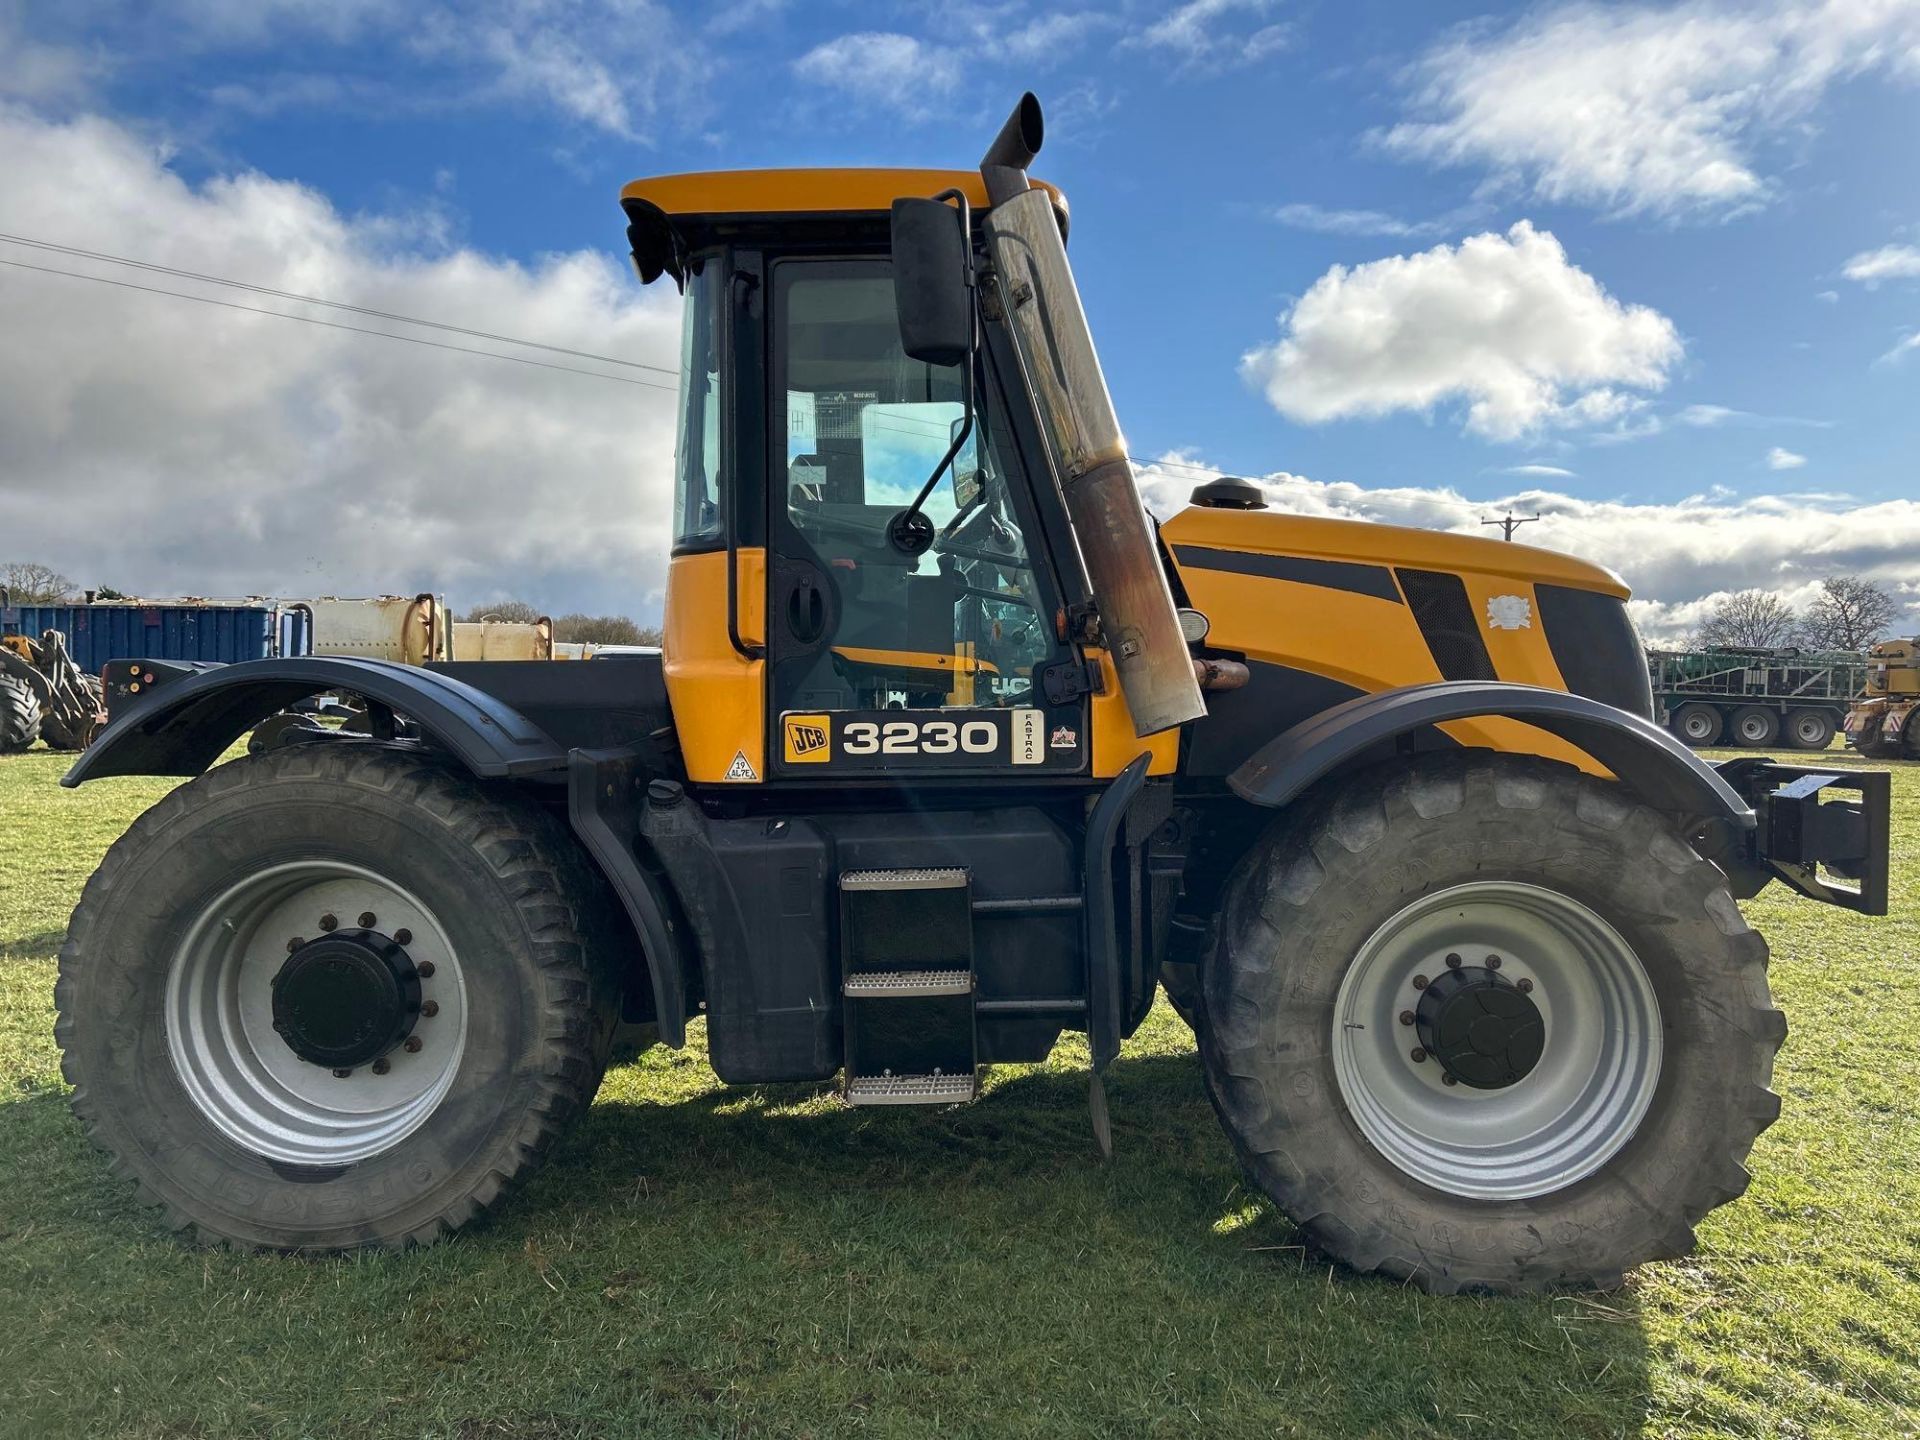 2009 JCB Fastrac 3230, 65kph, 3 rear spool valves. Datatagged. On Firestone 540/65R30 front and Noki - Image 4 of 13